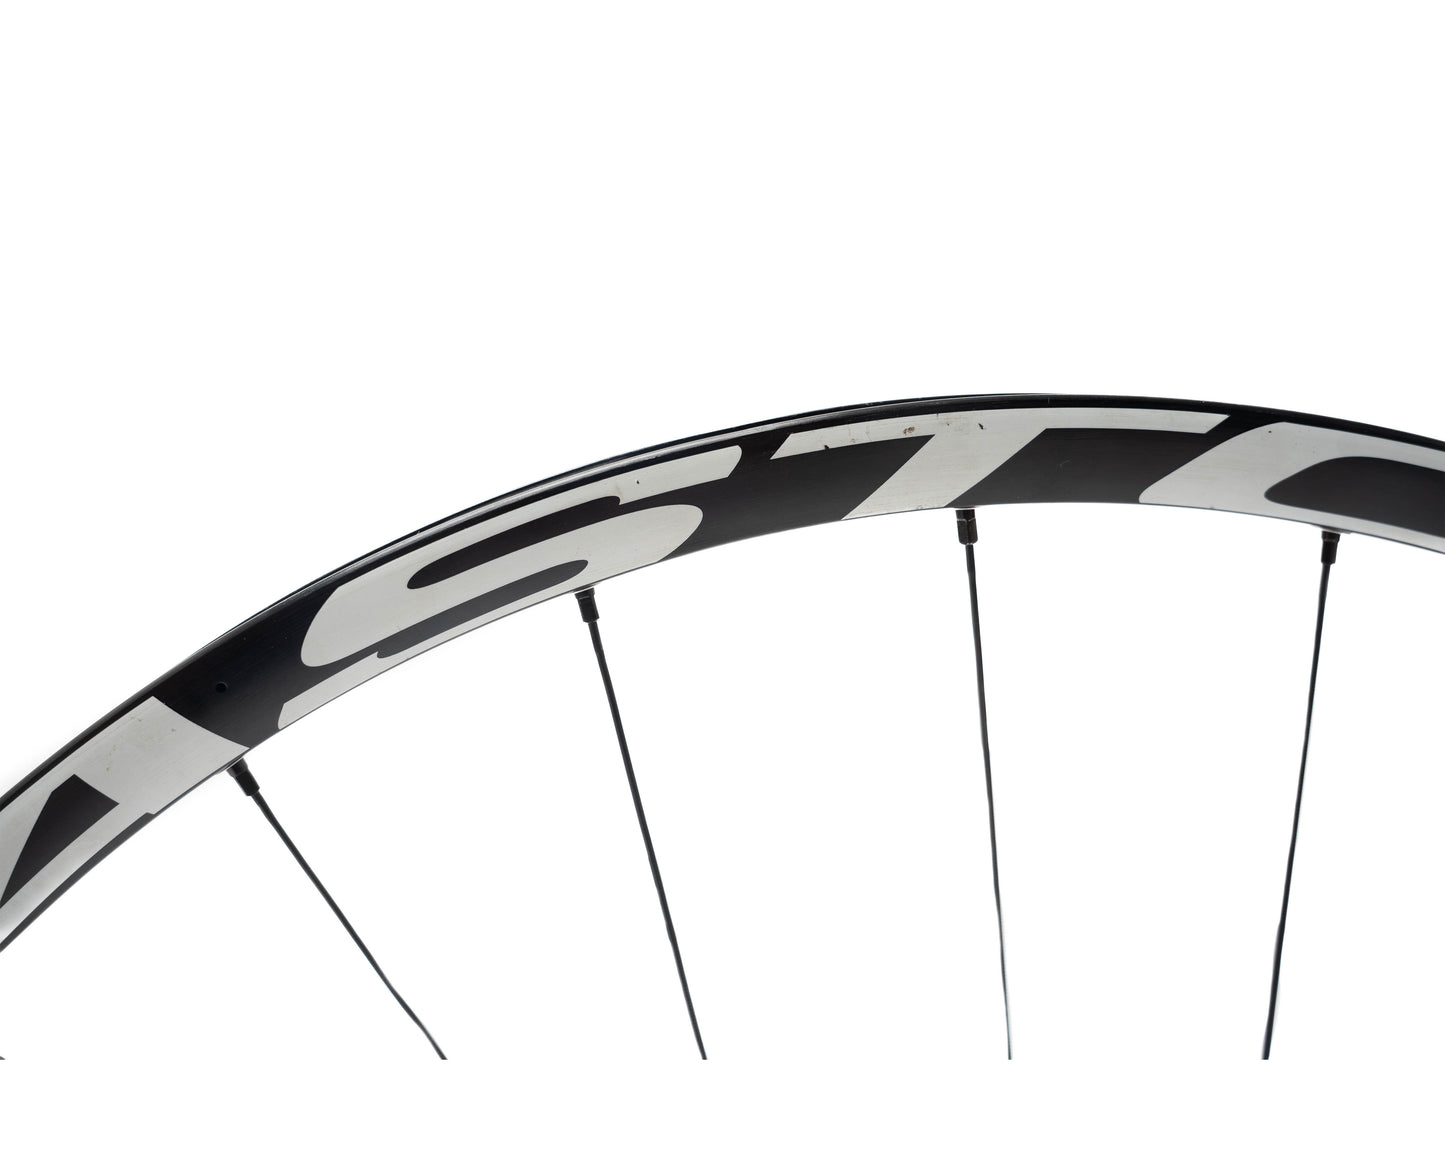 Easton Haven RR Whl 10x135 29 Blk(NEW OTHER)